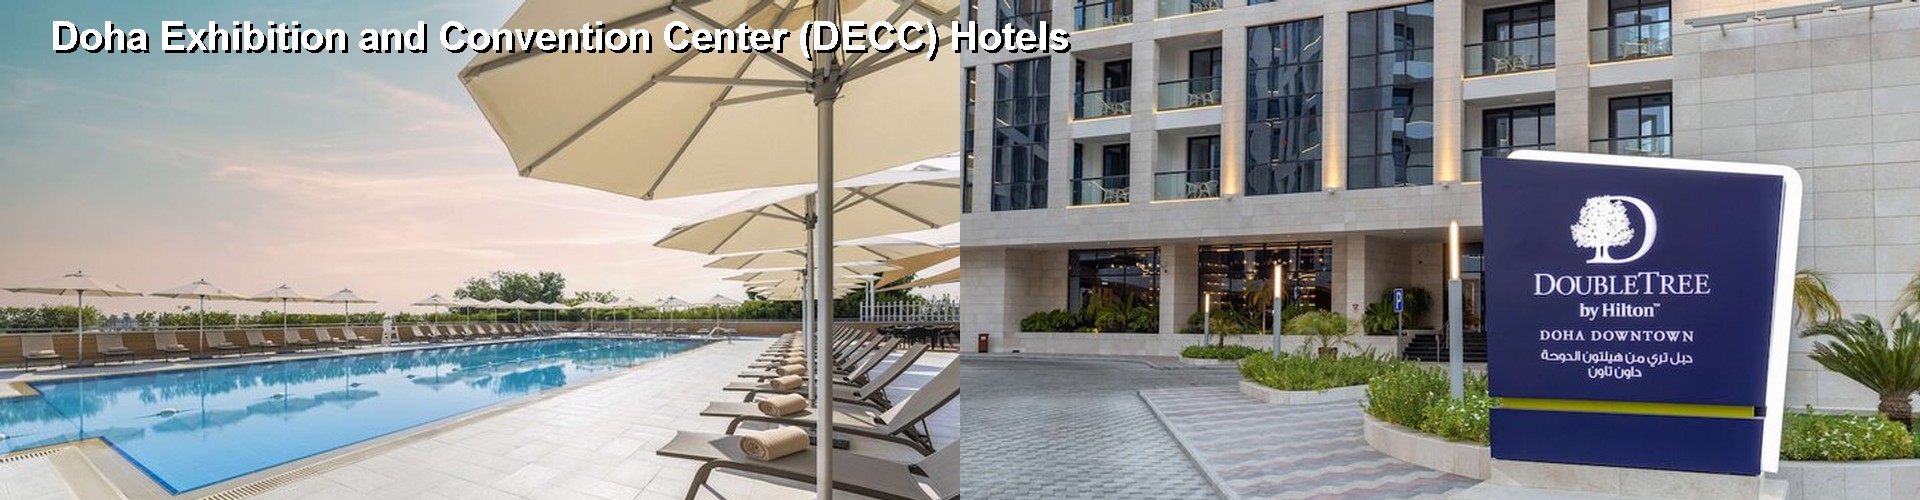 5 Best Hotels near Doha Exhibition and Convention Center (DECC)